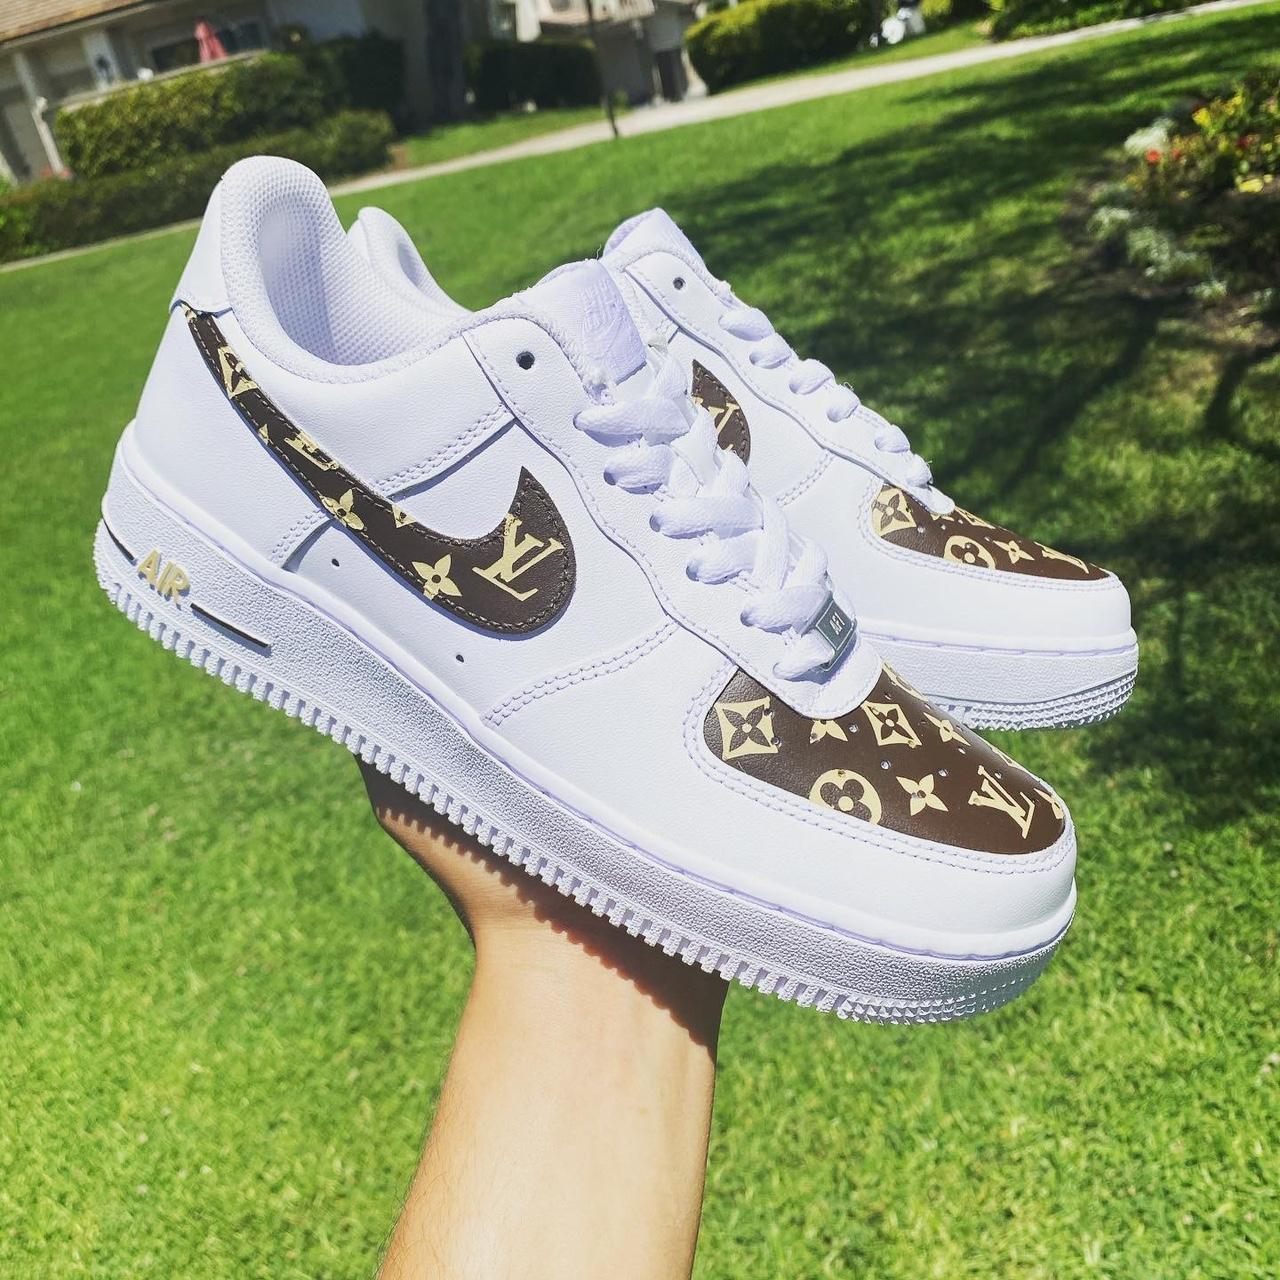 Used Air Force 1 x Louis Vuitton $100 OBO #lv - Depop